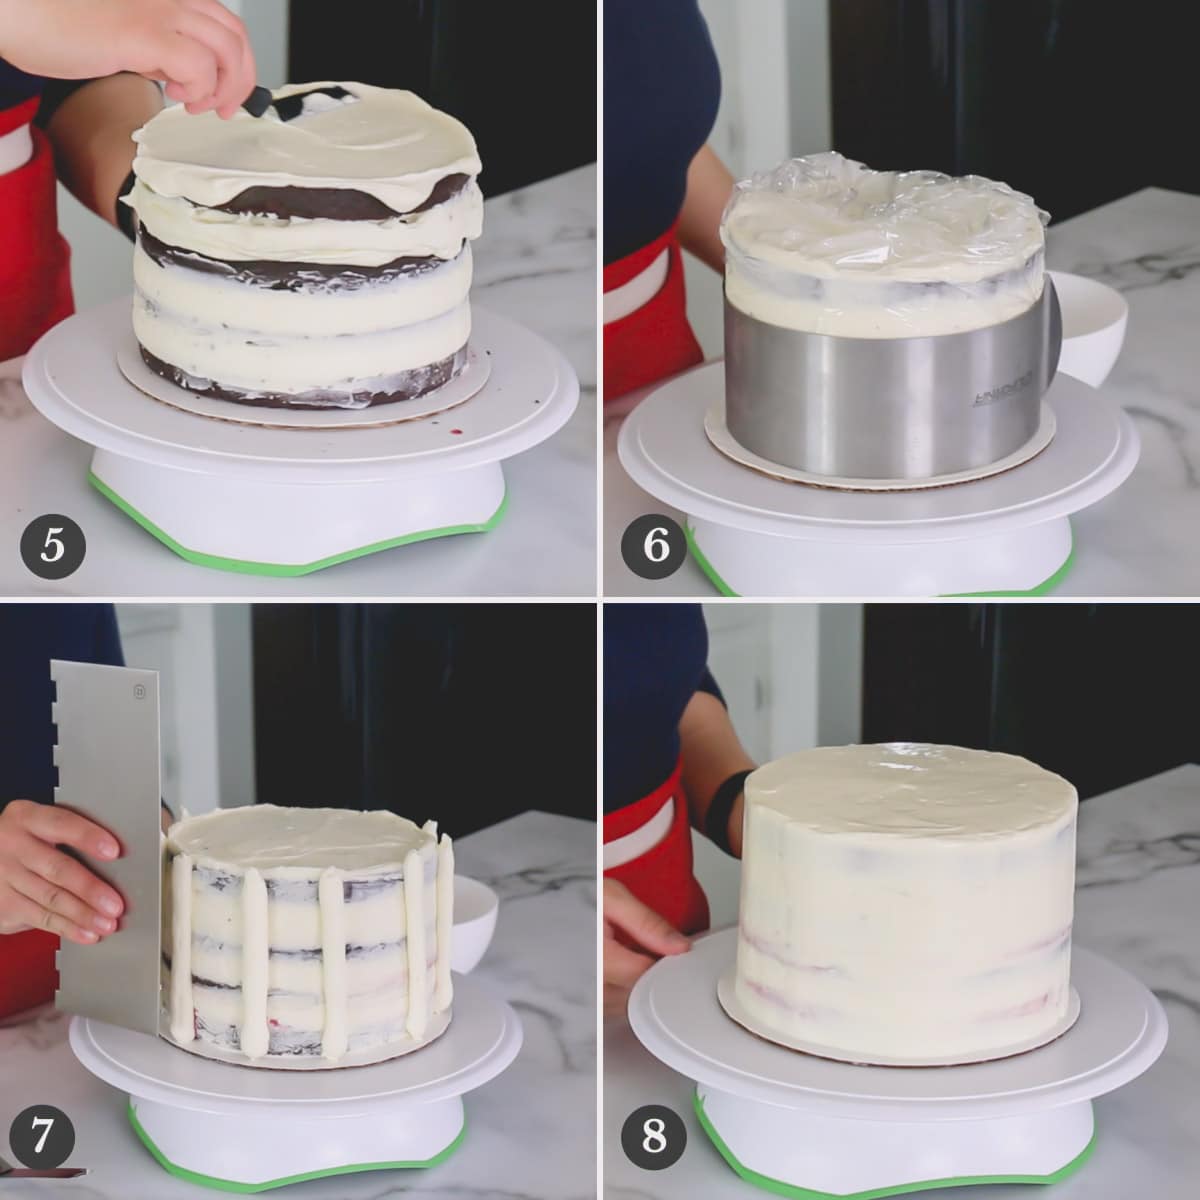 Step by step photos of crumb coating and final frosting of Black Forest Cake.